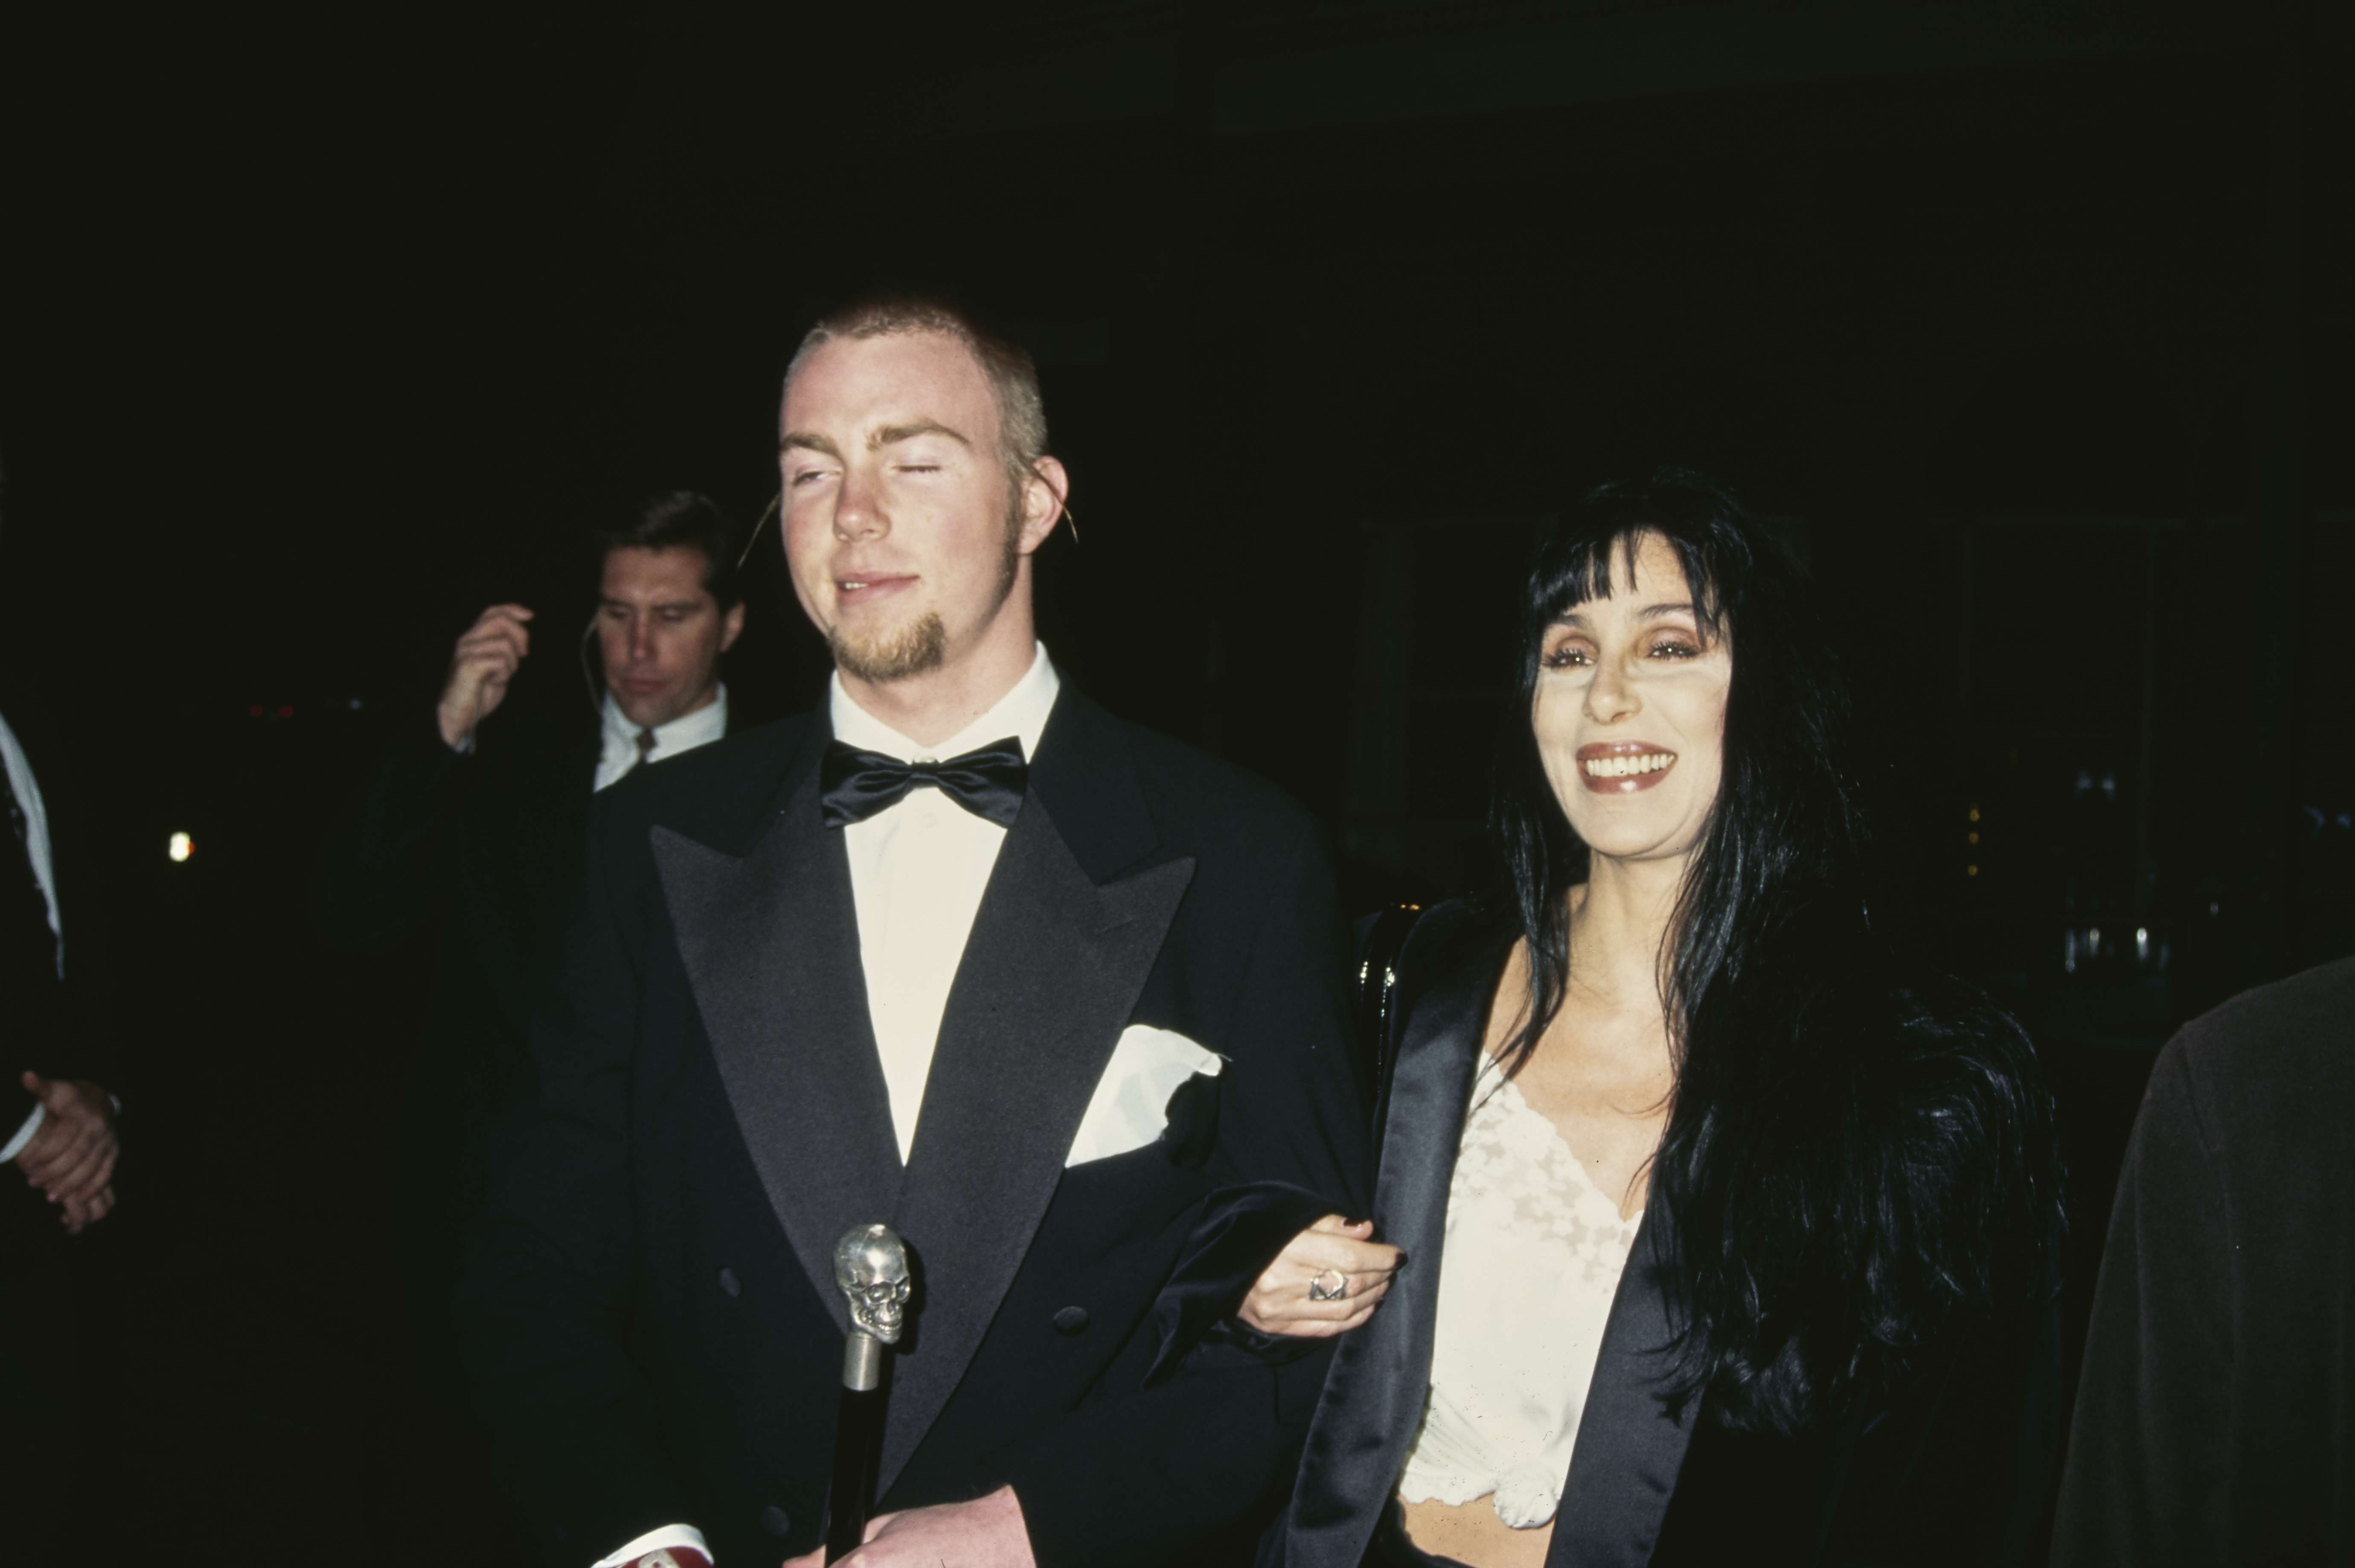 Elijah Blue Allman and his mother Cher were in attendance at the 5th Annual Fire and Ice Ball to Benefit Revlon UCLA Women Cancer Centre in Century City, California in 1994. | Source: Getty Images